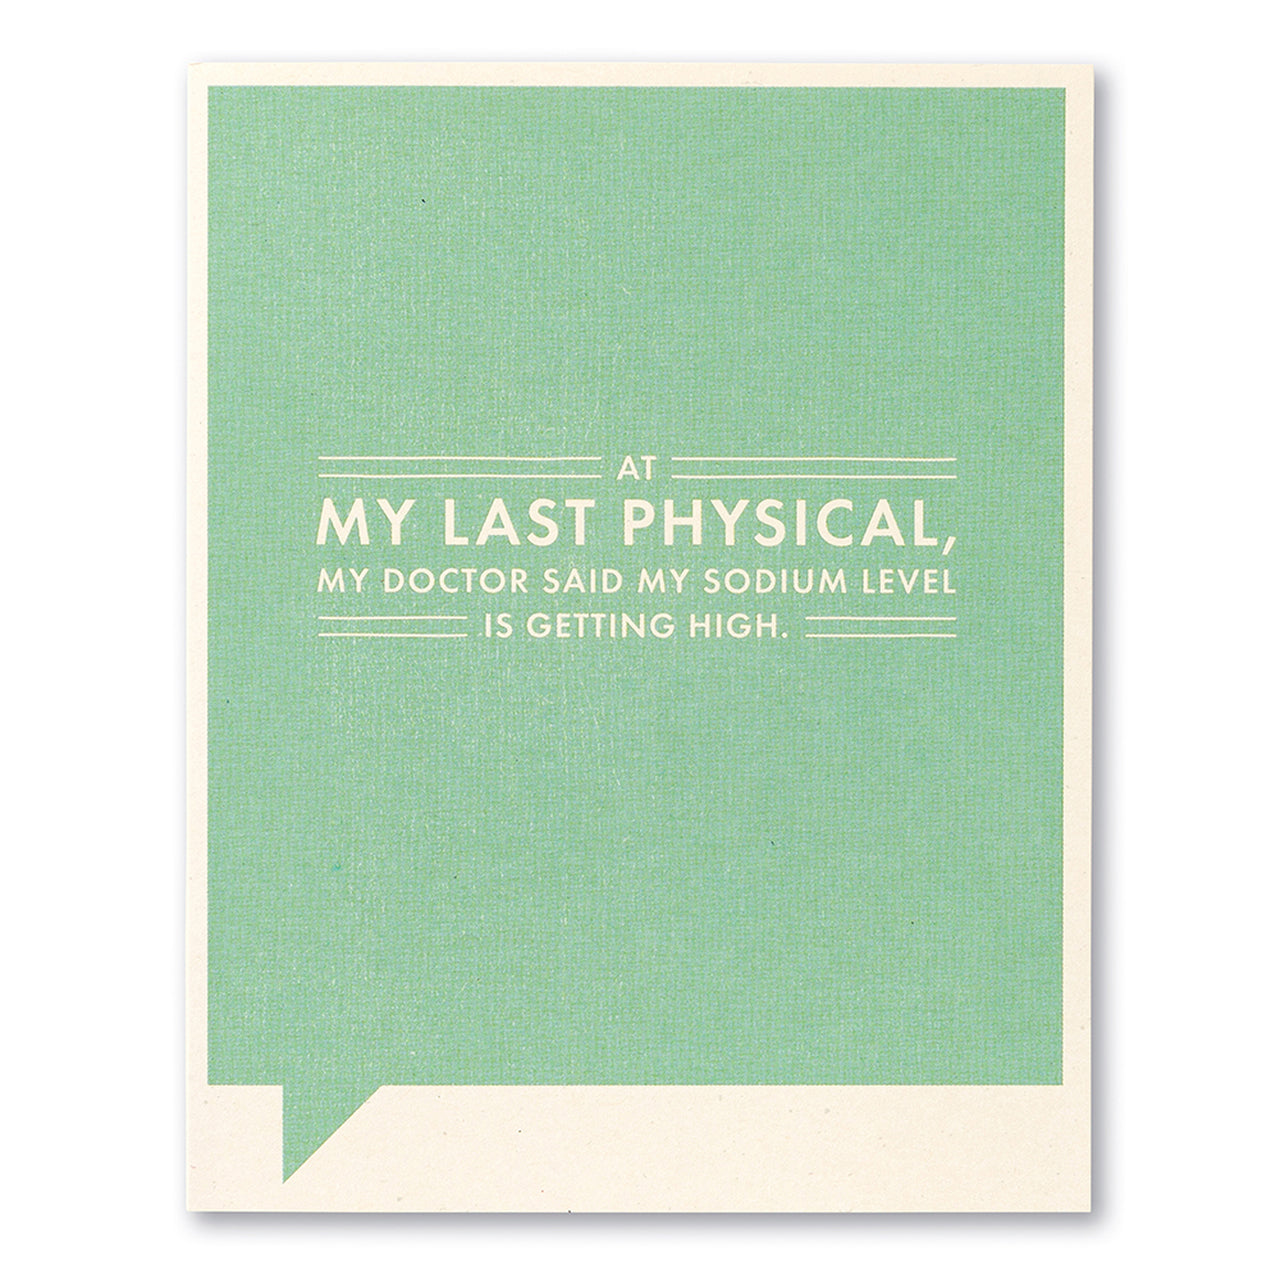 Frank and Funny Greeting Card - Just For Laughs - At my last physical, my doctor said my sodium level is getting high - Mellow Monkey